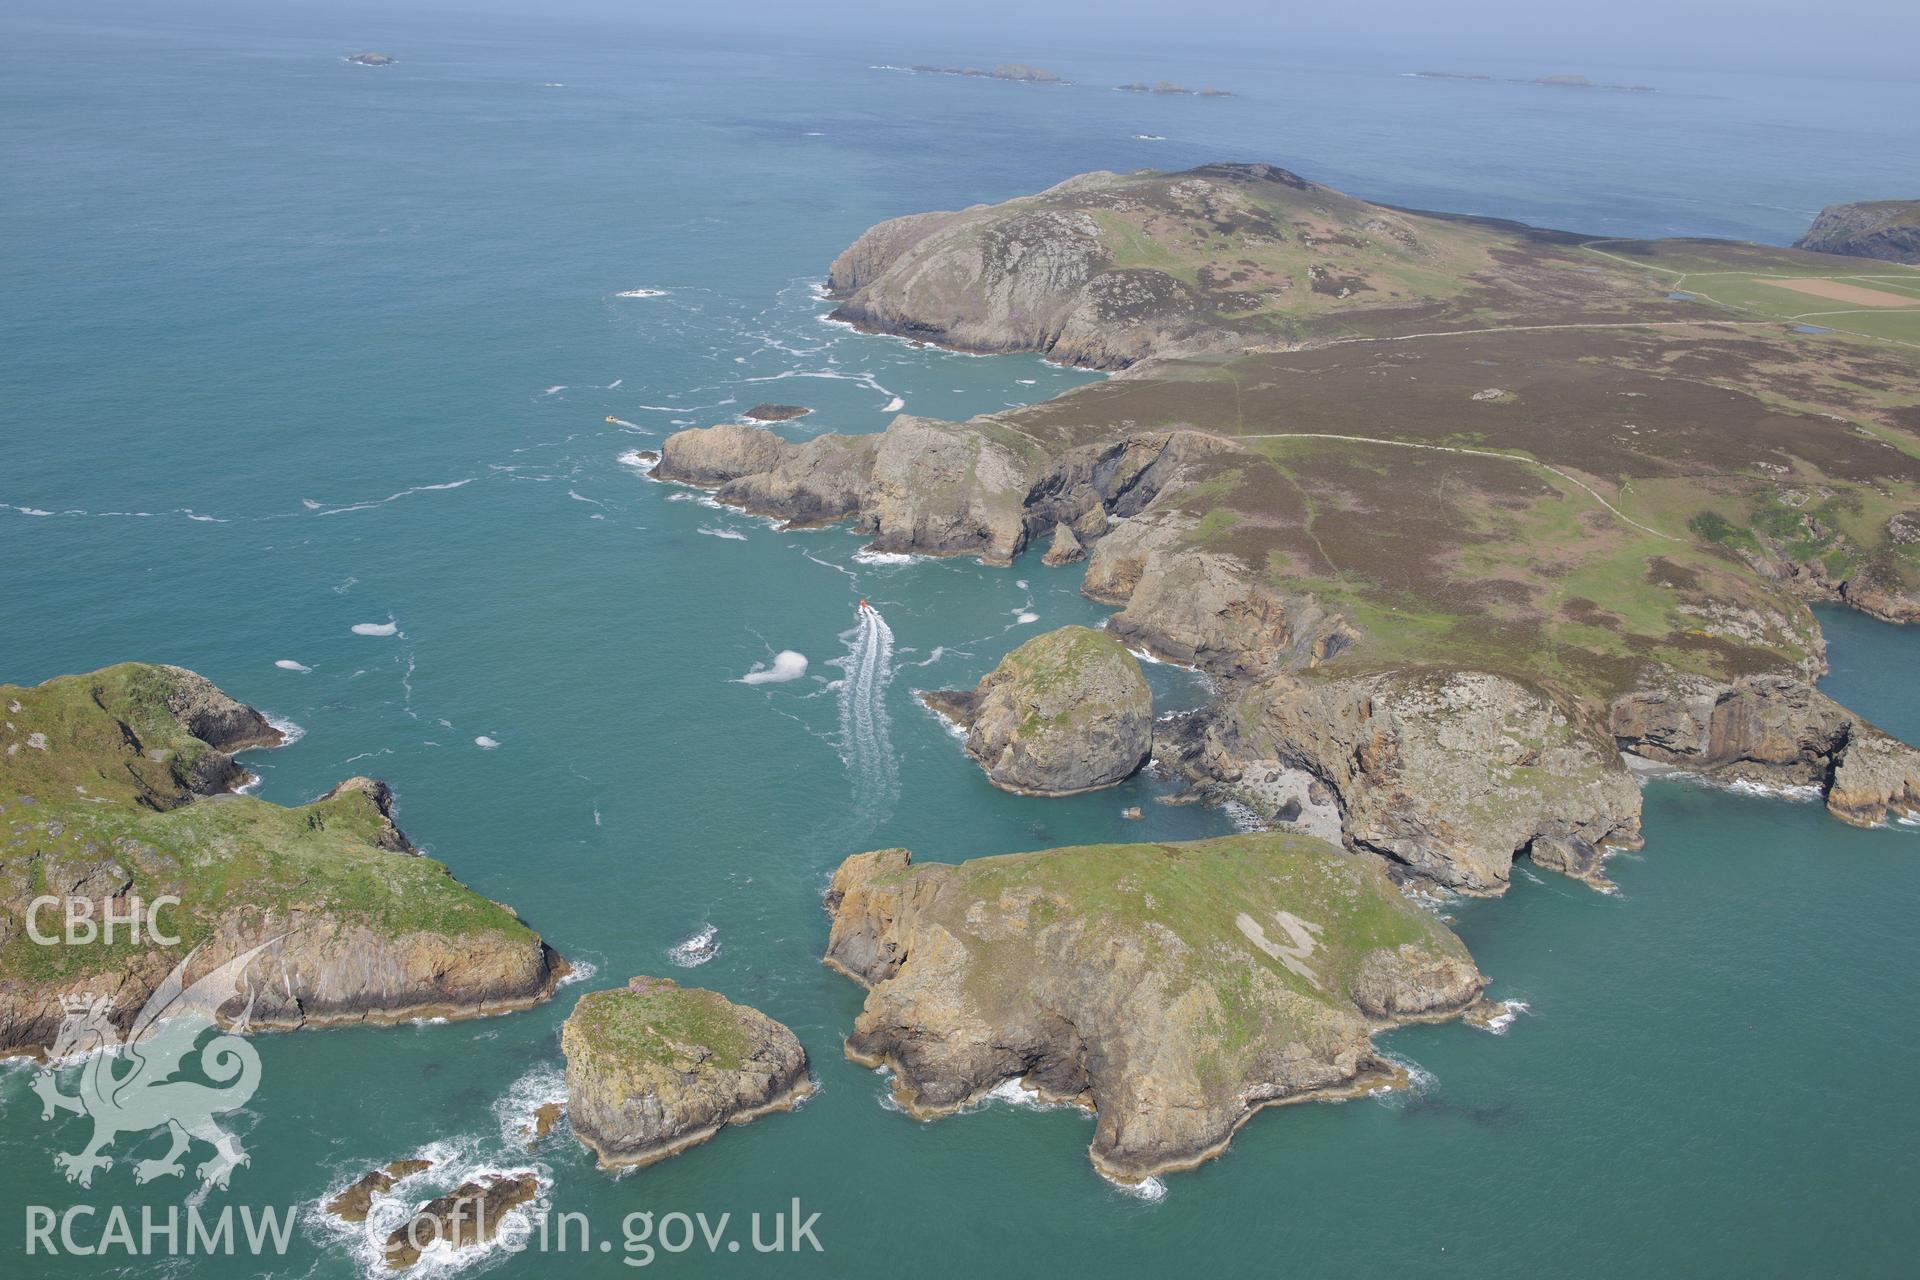 Ramsey Island, and the smaller Ynys Bery and Ynys Cantwr, off the coast near St Davids. Oblique aerial photograph taken during the Royal Commission's programme of archaeological aerial reconnaissance by Toby Driver on 13th May 2015.